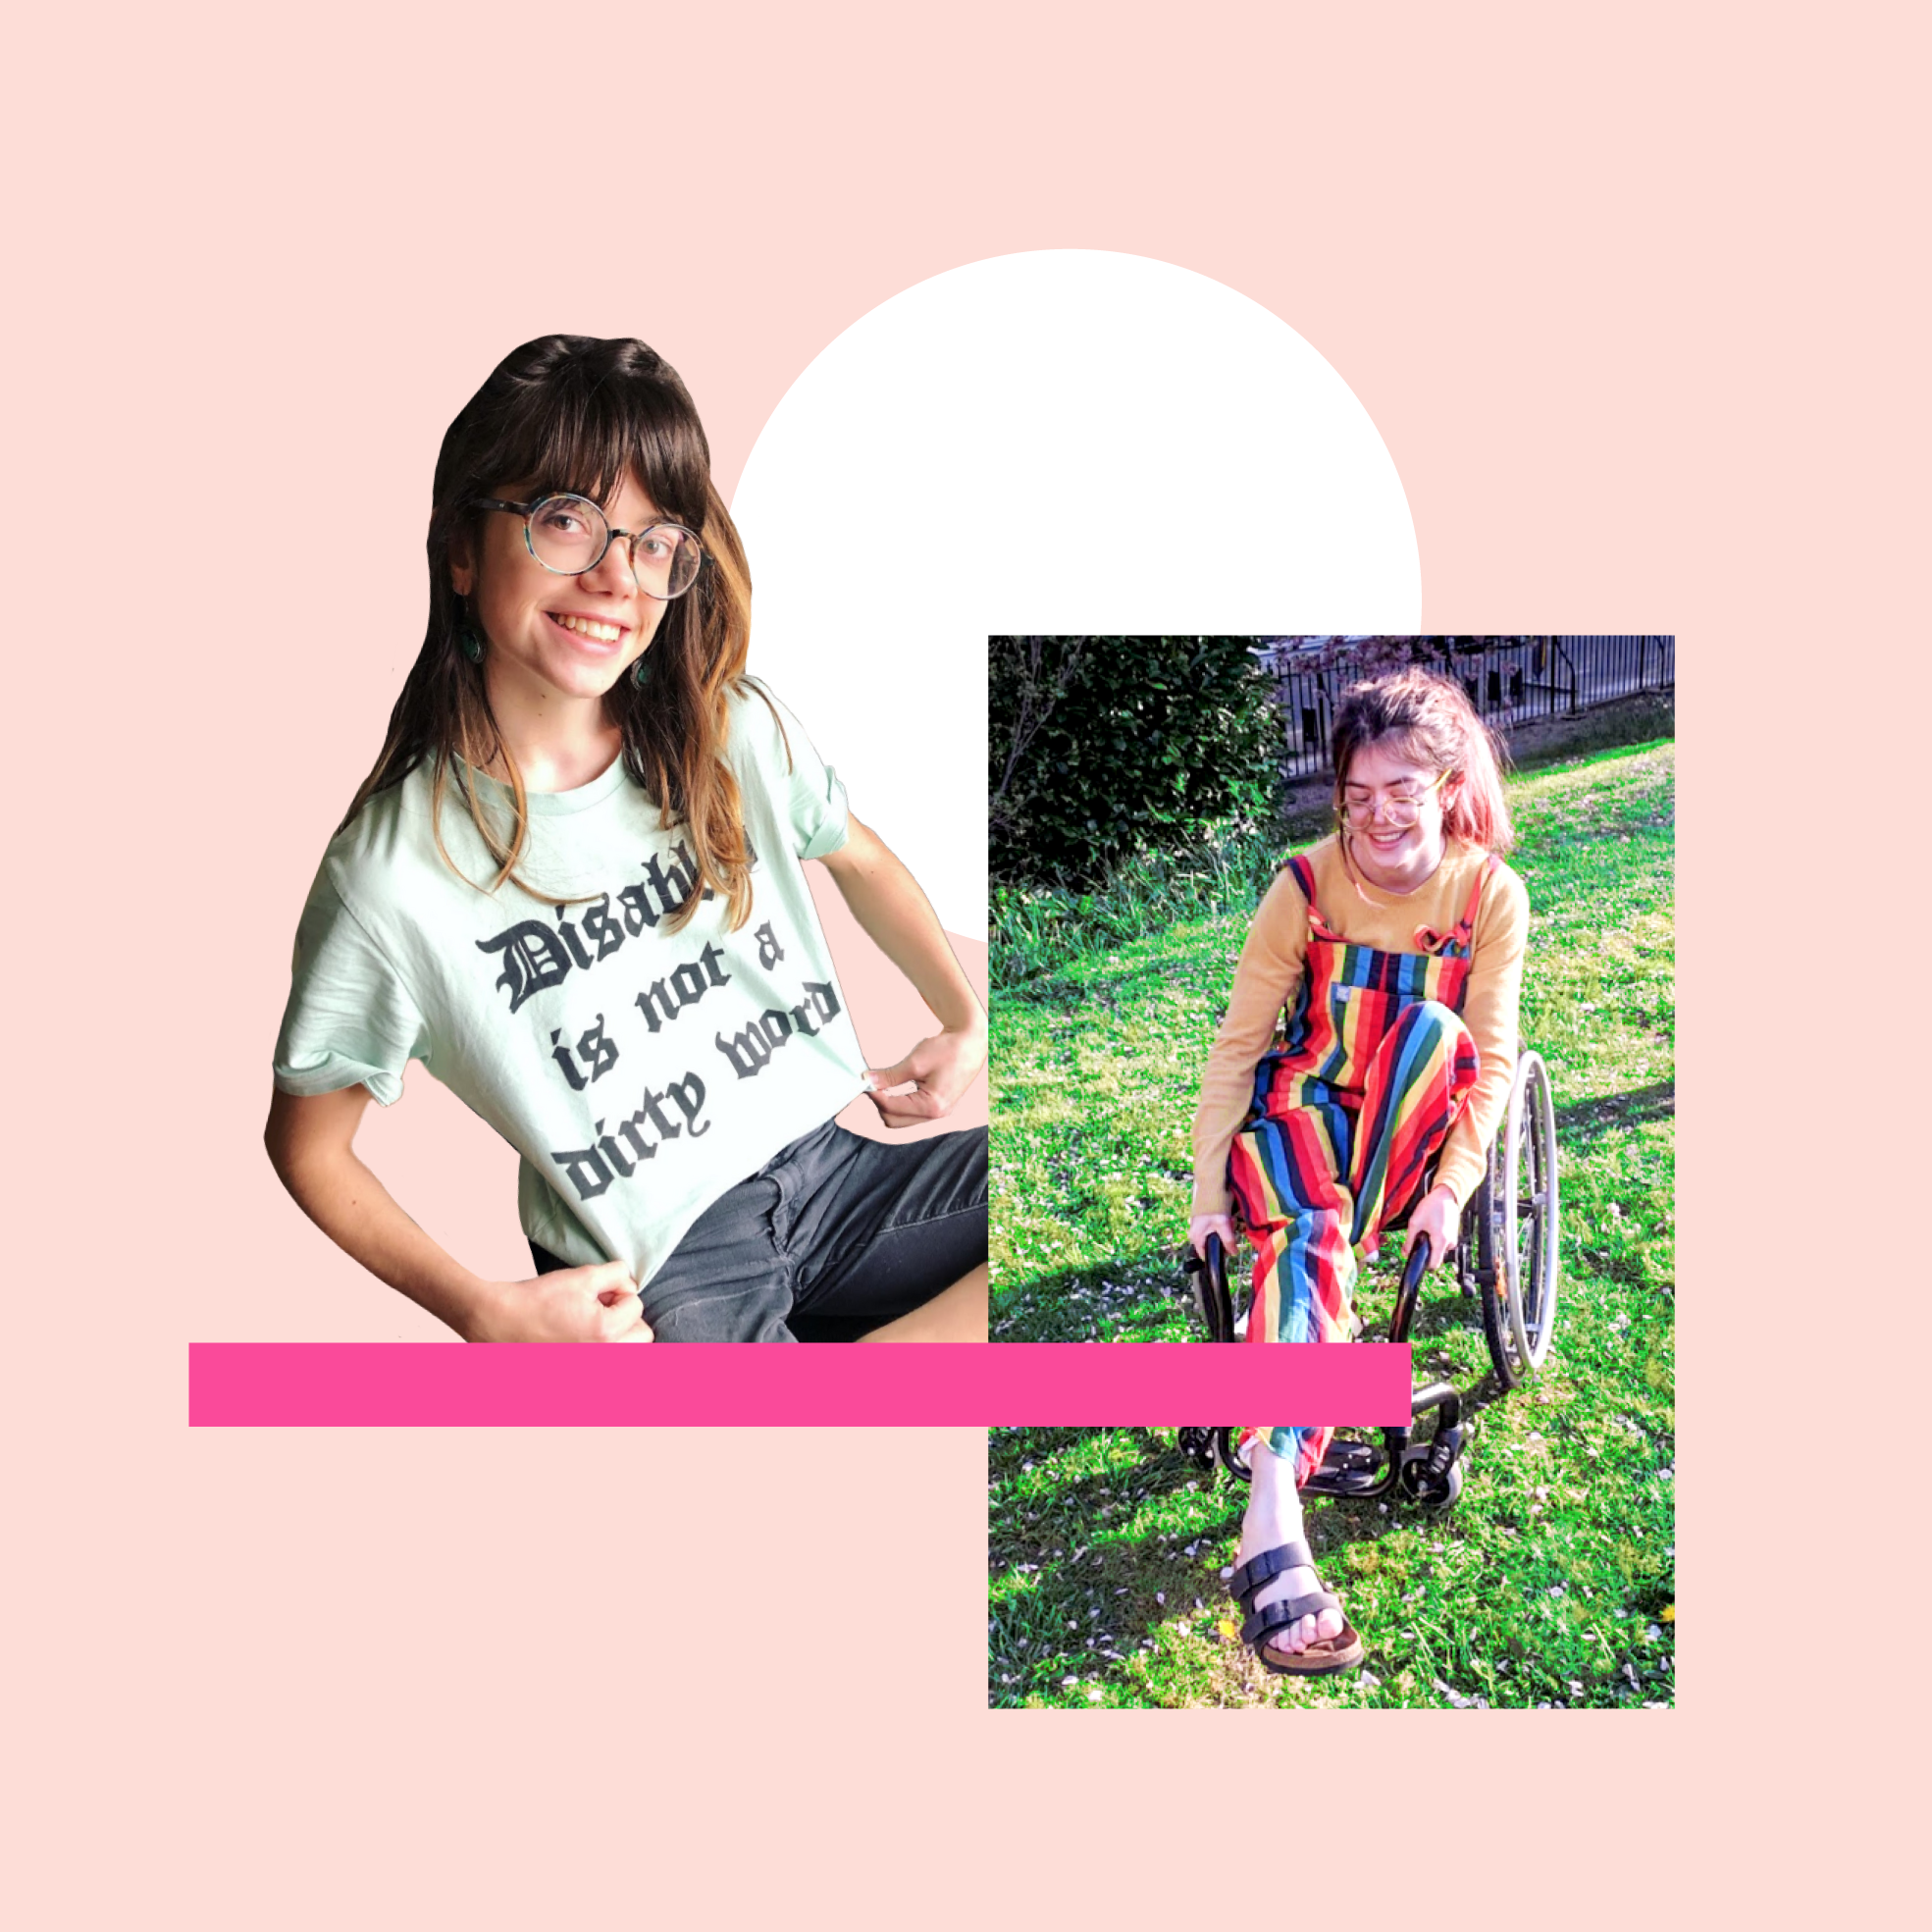 Two photos of Grace Spence Green, a young woman who was left disabled after a stranger jumped on her in a shopping centre from a height, pictured in a top that says "Disability is not a dirty word" and in her wheelchair wearing striped colourful dungarees.